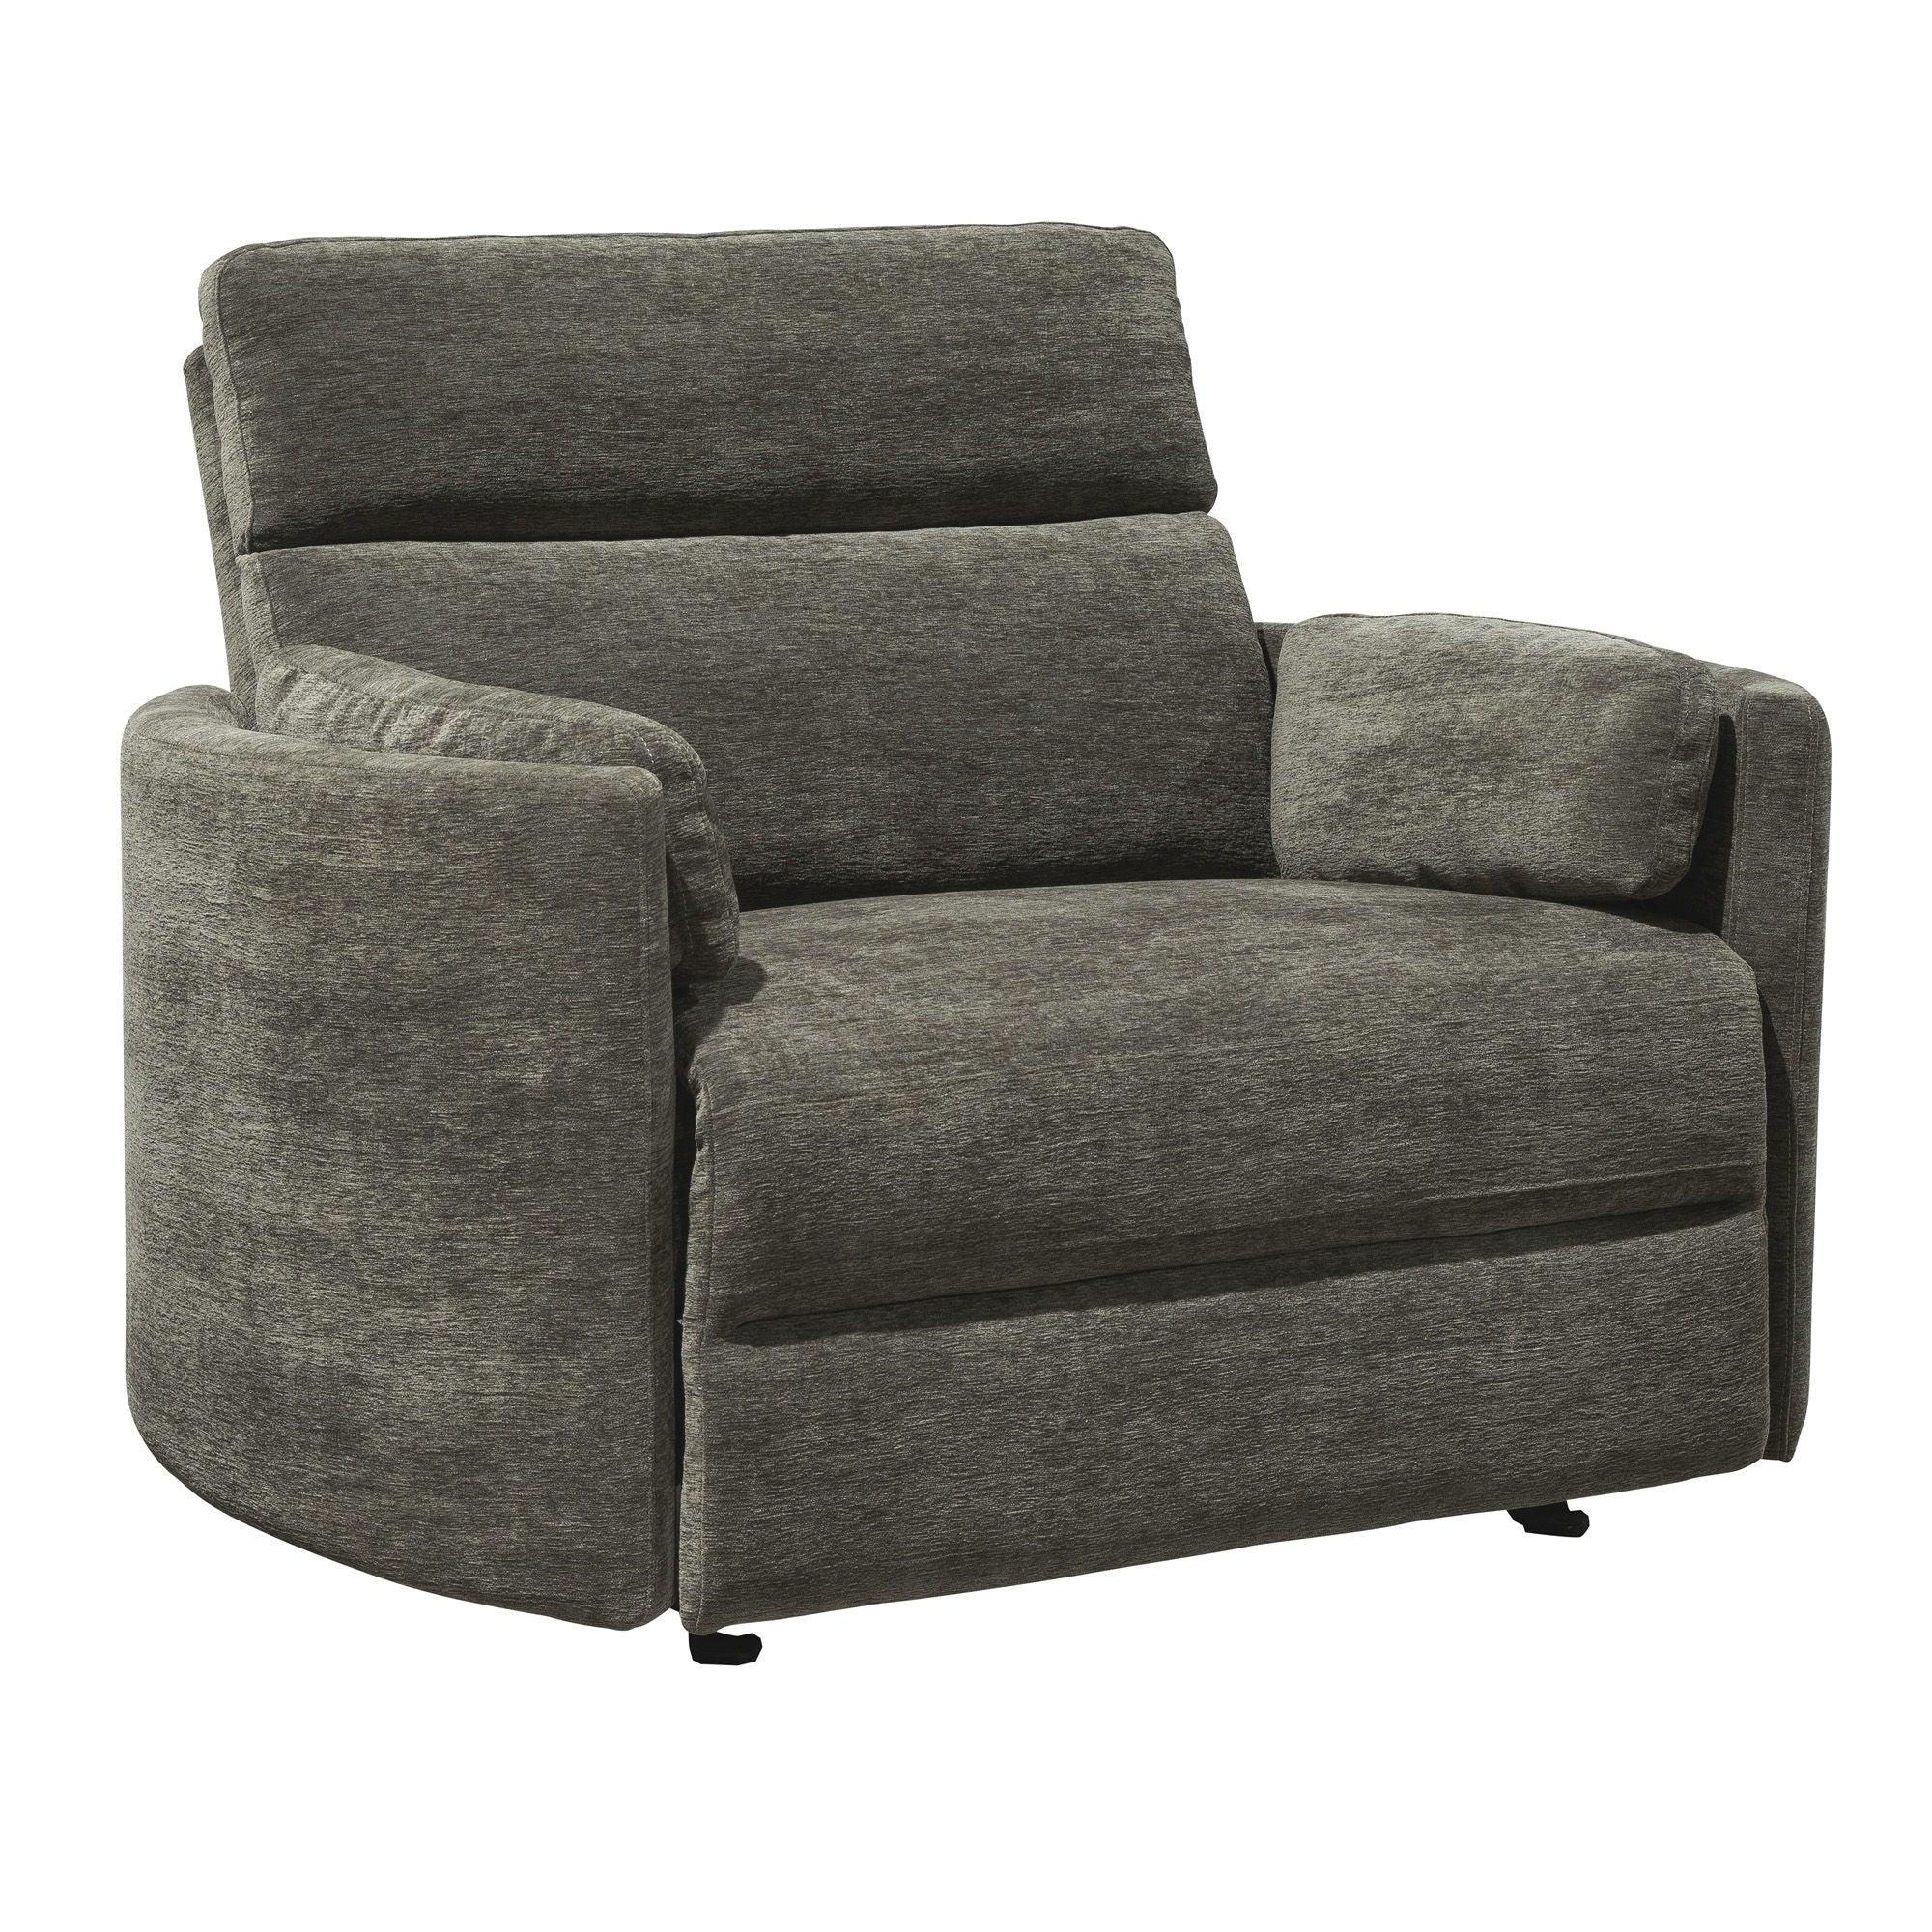 Parker Living - Radius Xl - Extra Wide Power Glider Recliner - 5th Avenue Furniture